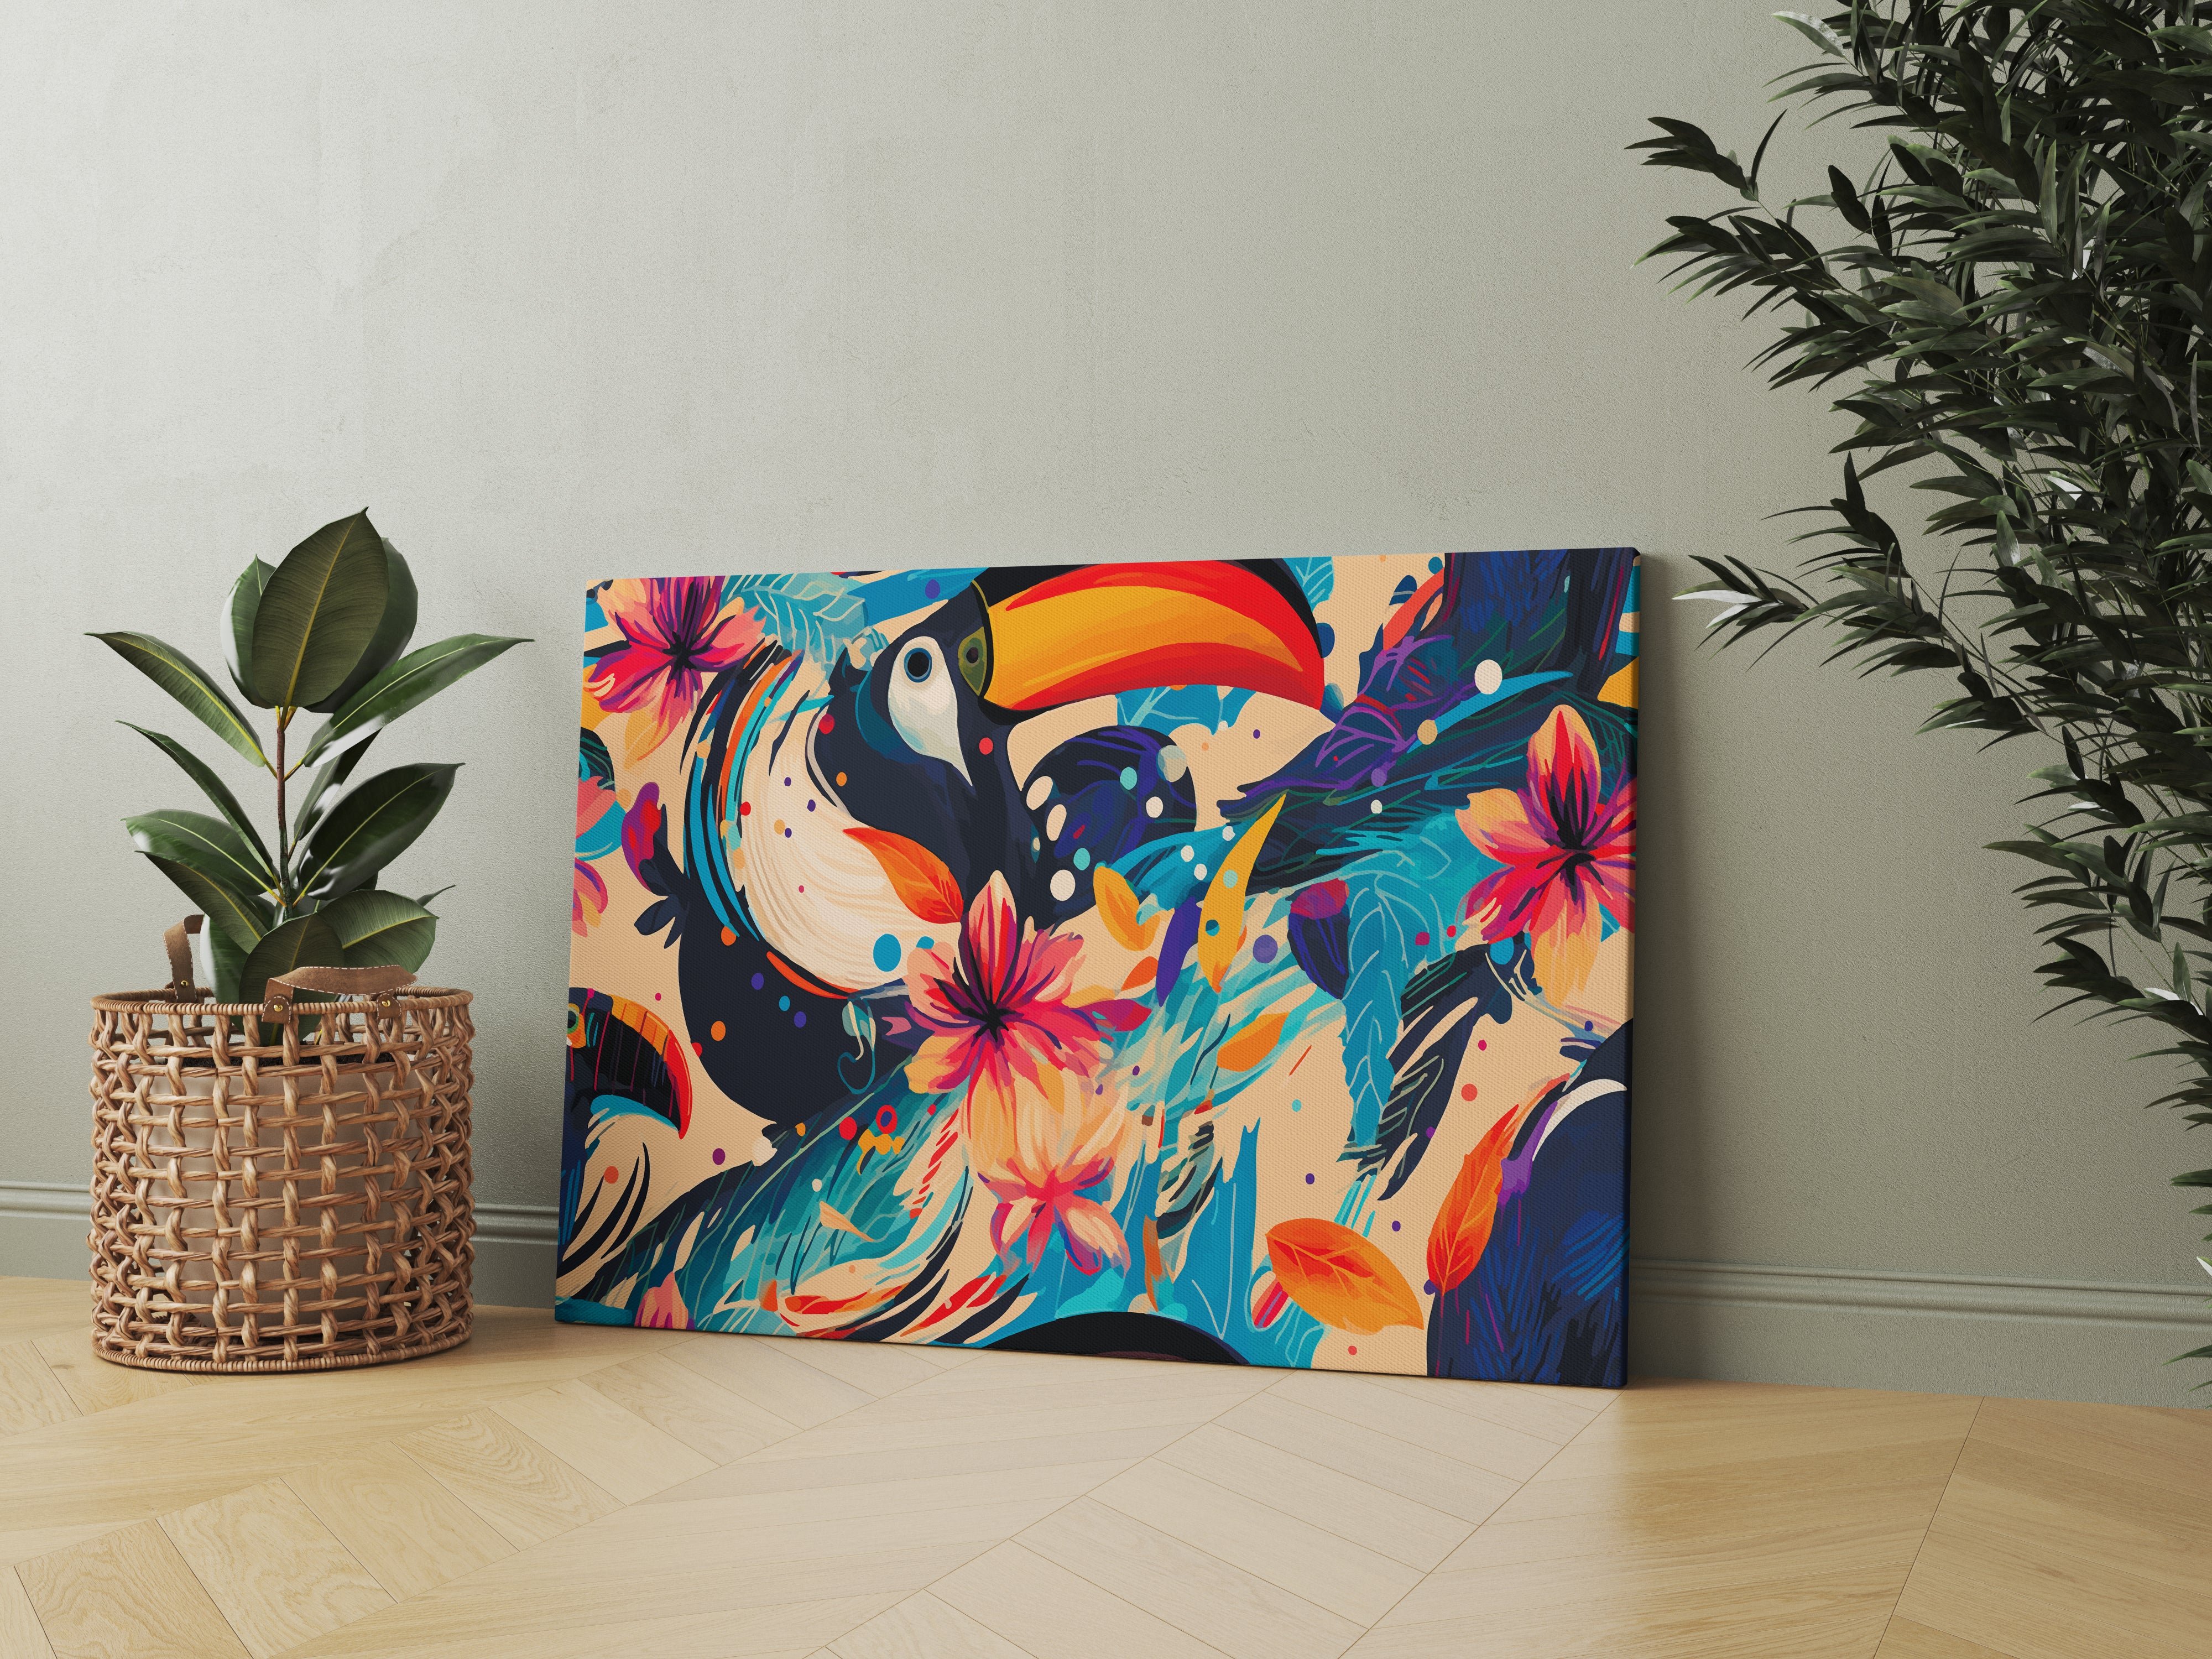 Abstract Colorful Bird Art Canvas Wall Painting